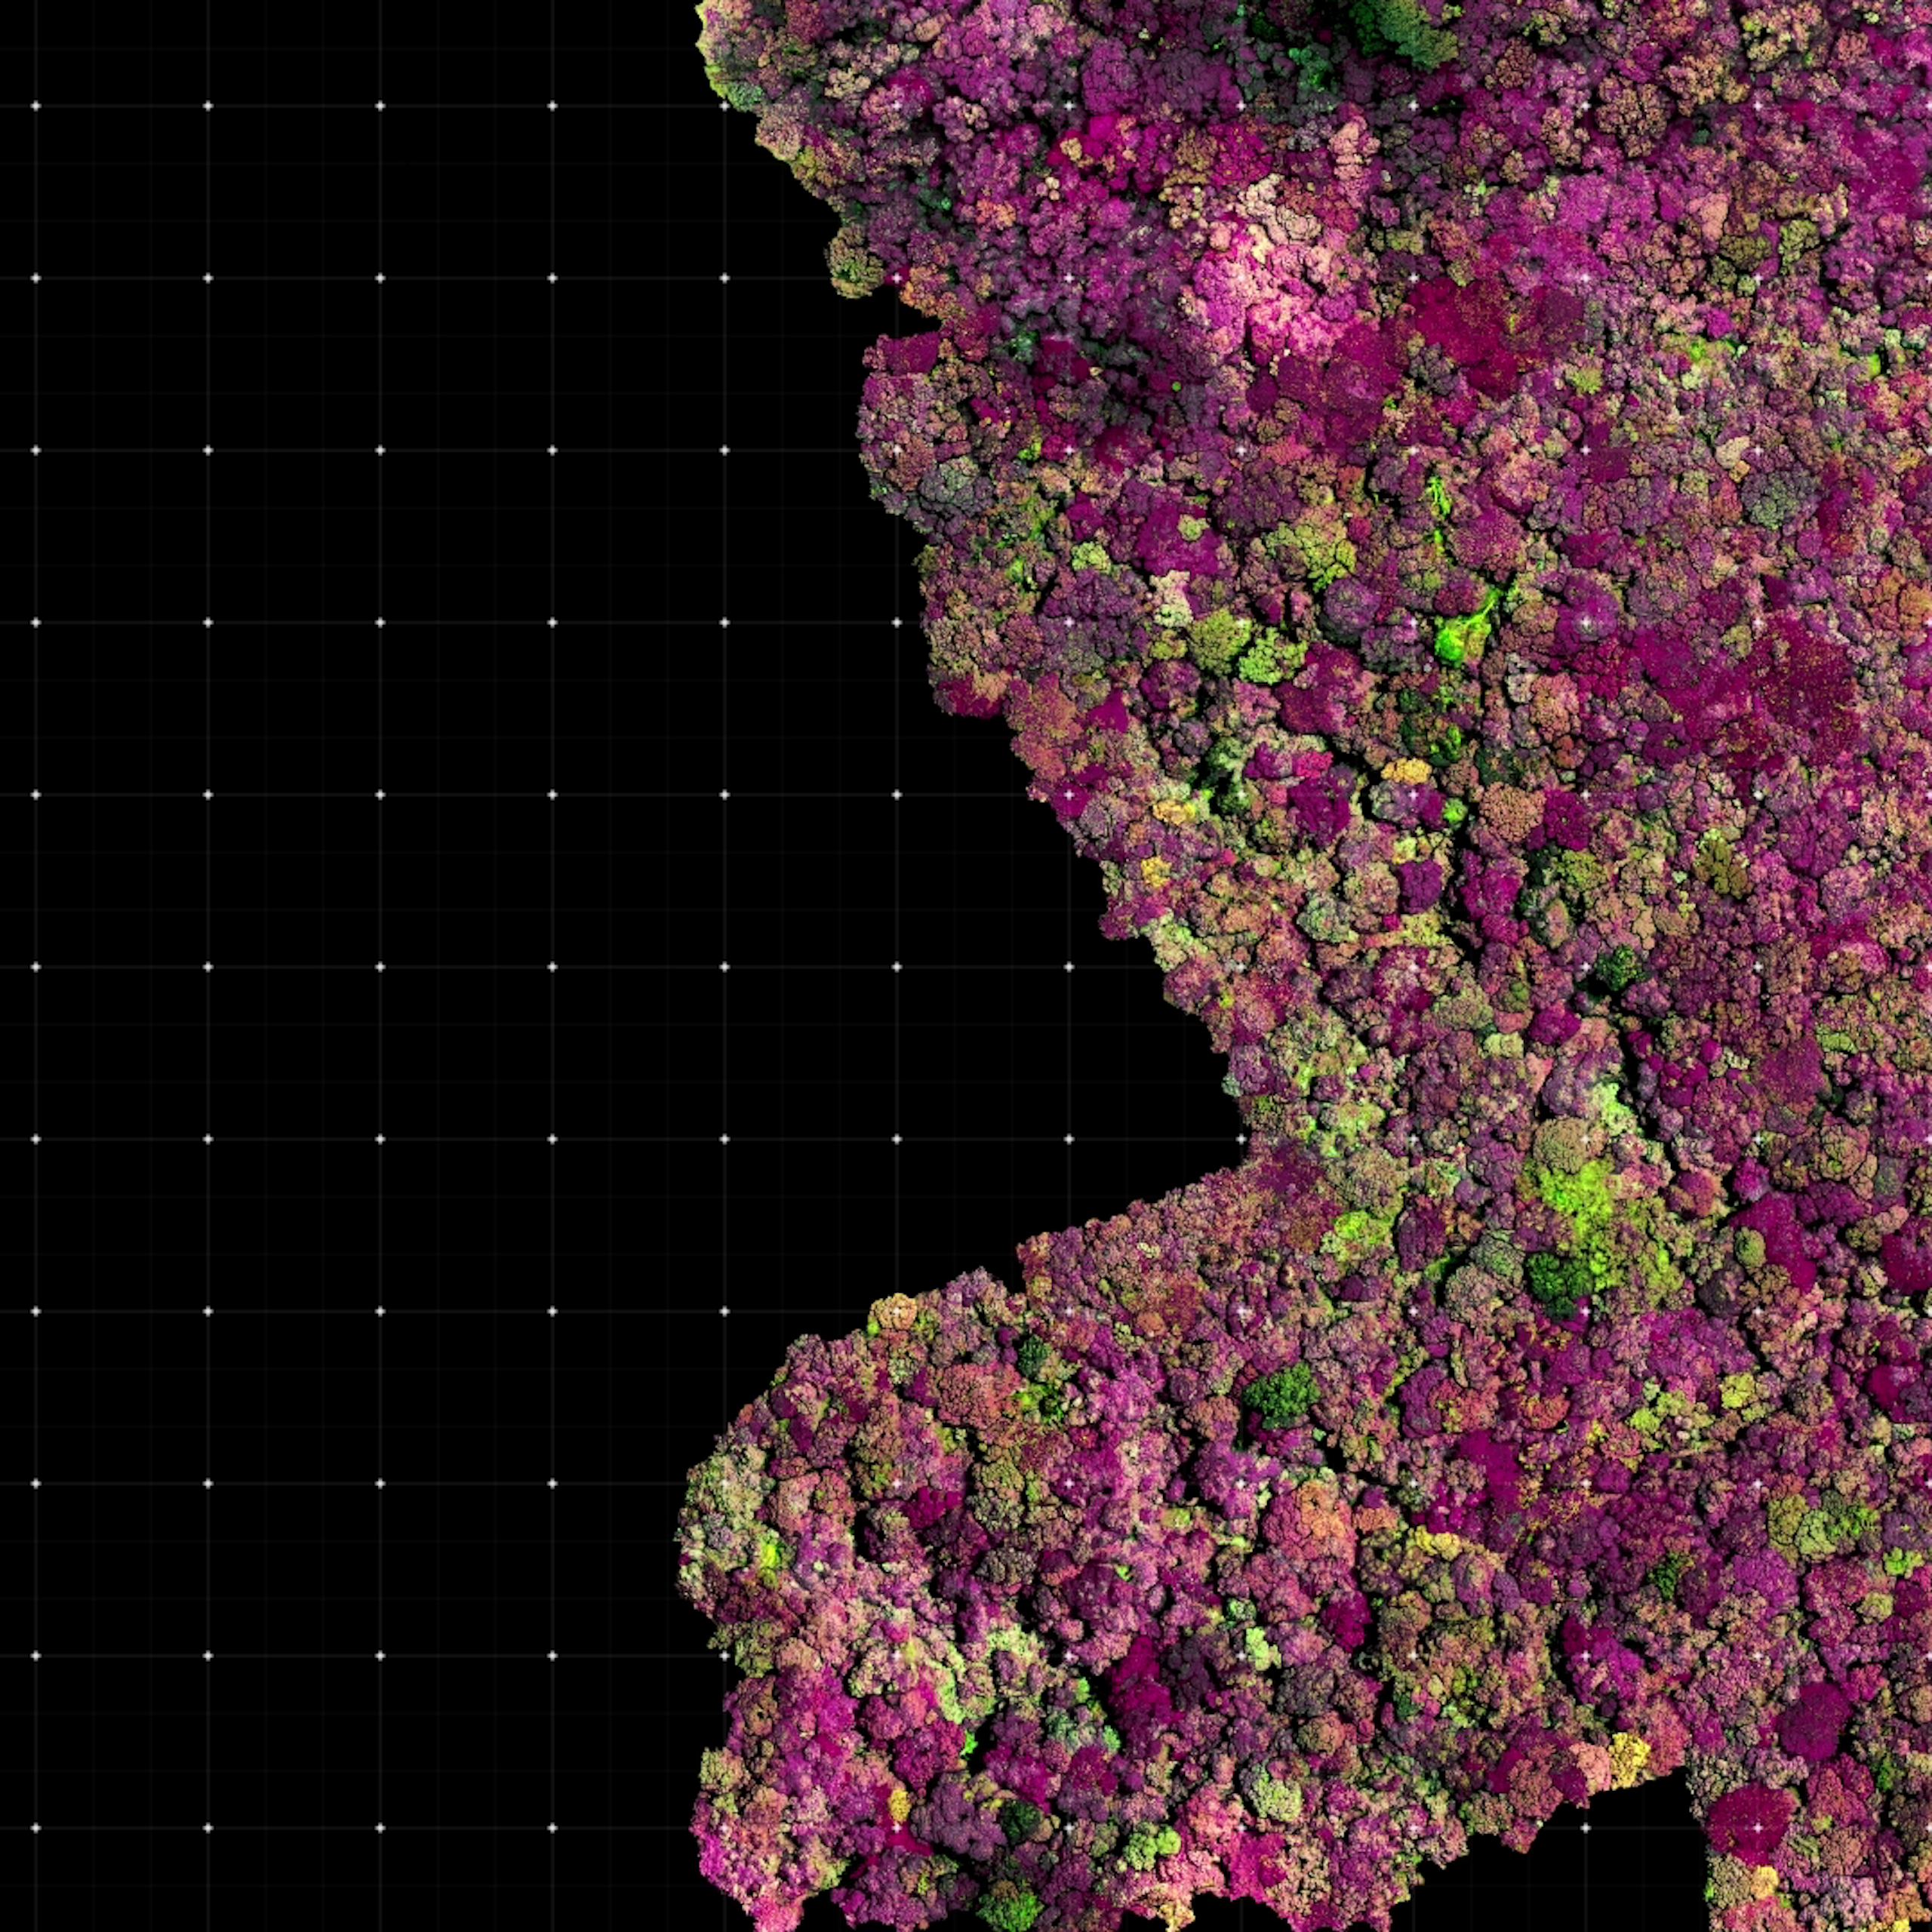 Aerial view of forest, plants highlighted in purple and green